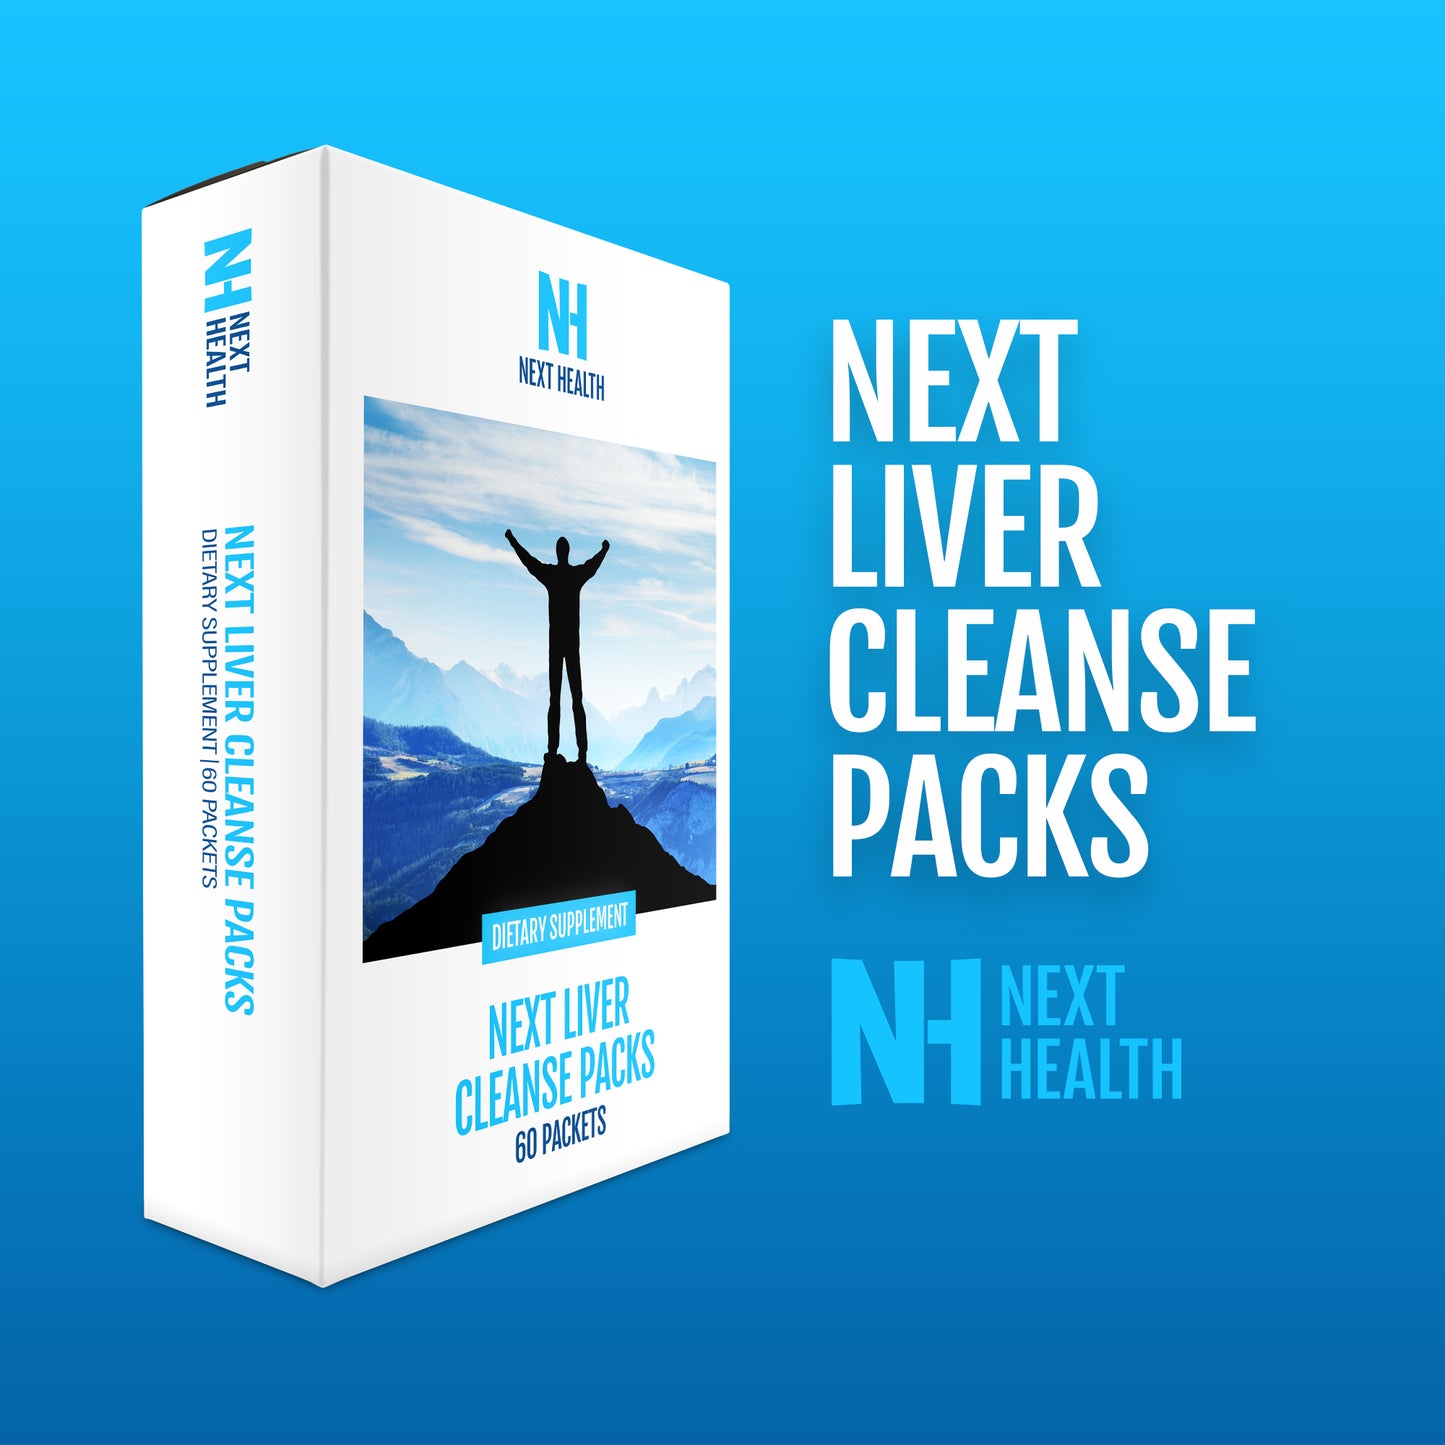 Next Liver Cleanse Packs